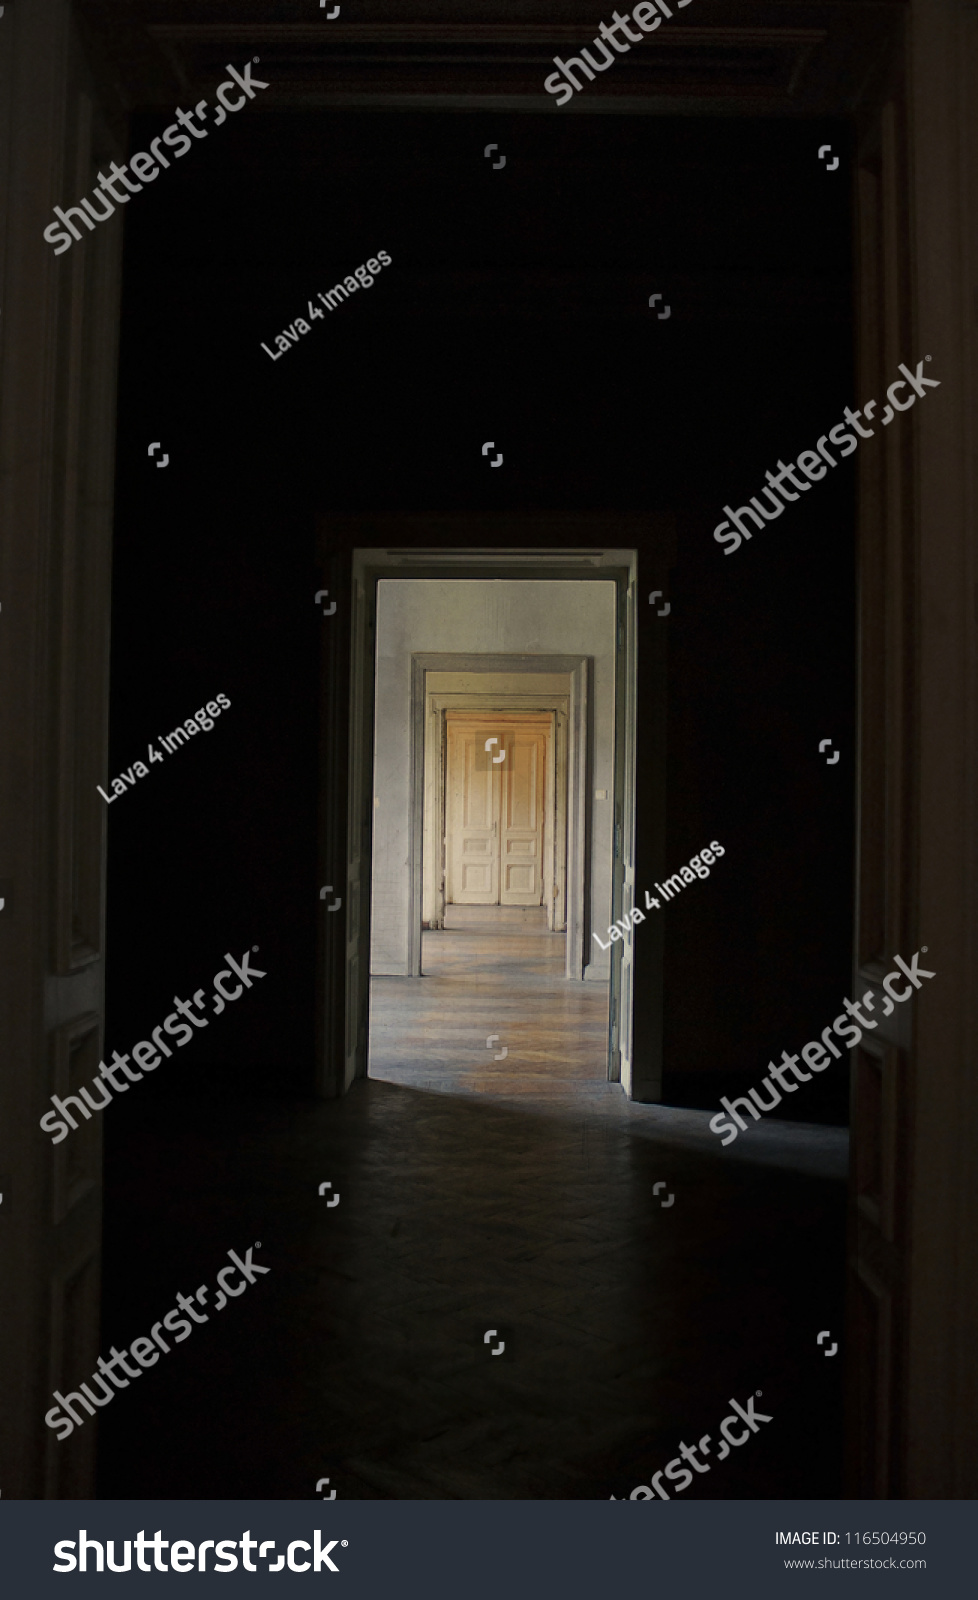 Closed door at the end of the hallway, rite of passage concept. Linear perspective view through several open doors and empty rooms. #116504950